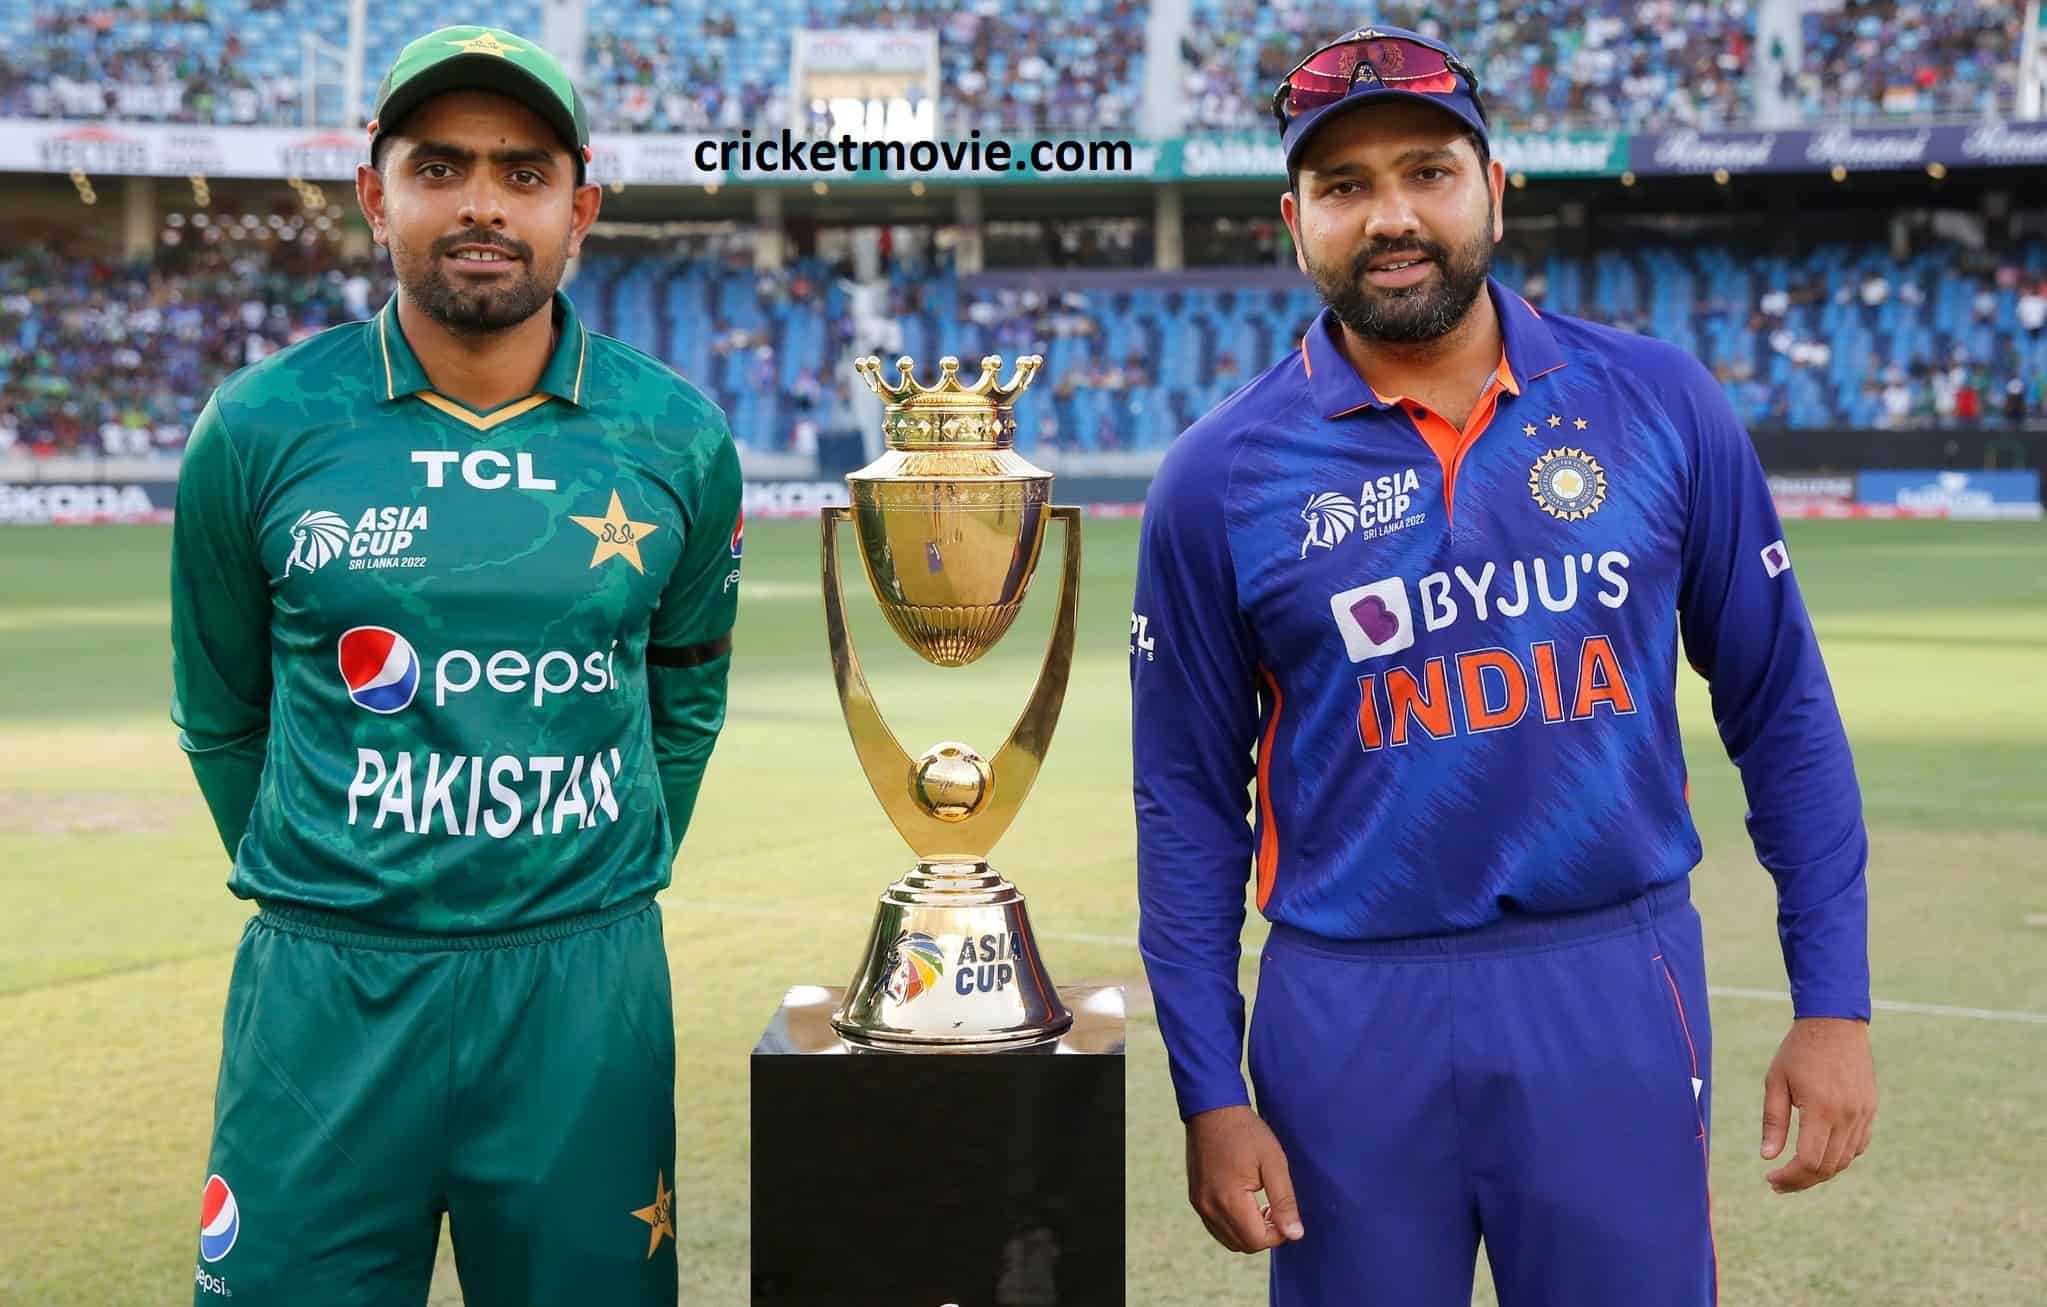 India beat Pakistan by 5 wickets in Asia Cup 2022-cricketmovie.com